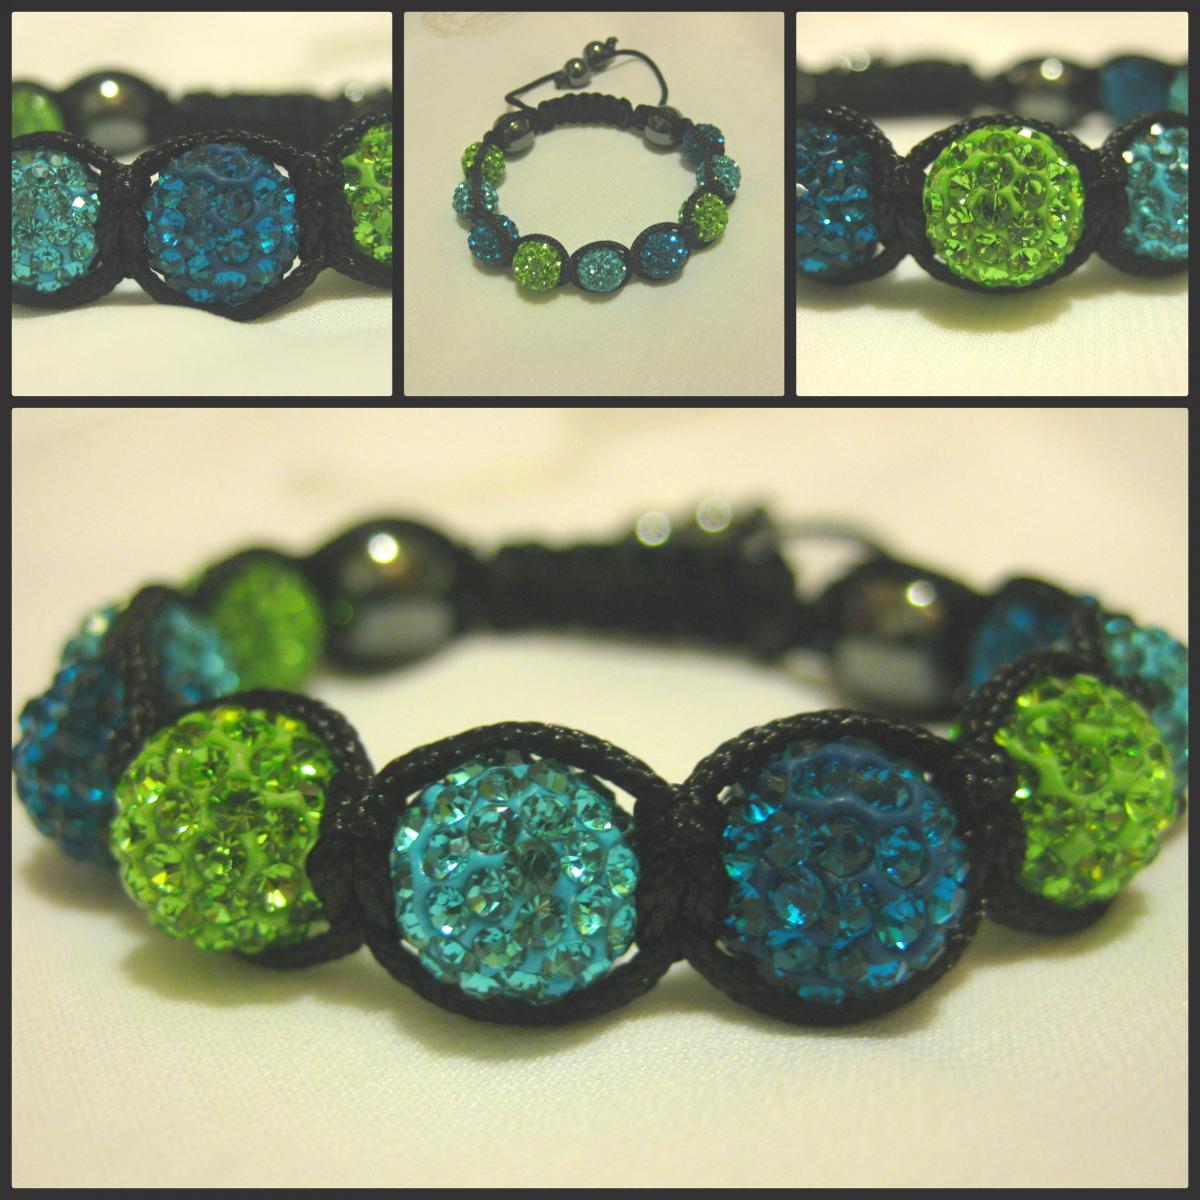 Peacock Blue, Vibrant Turquoise And Lime Green Crystal Pave Bead Macrame Friendship Bracelet